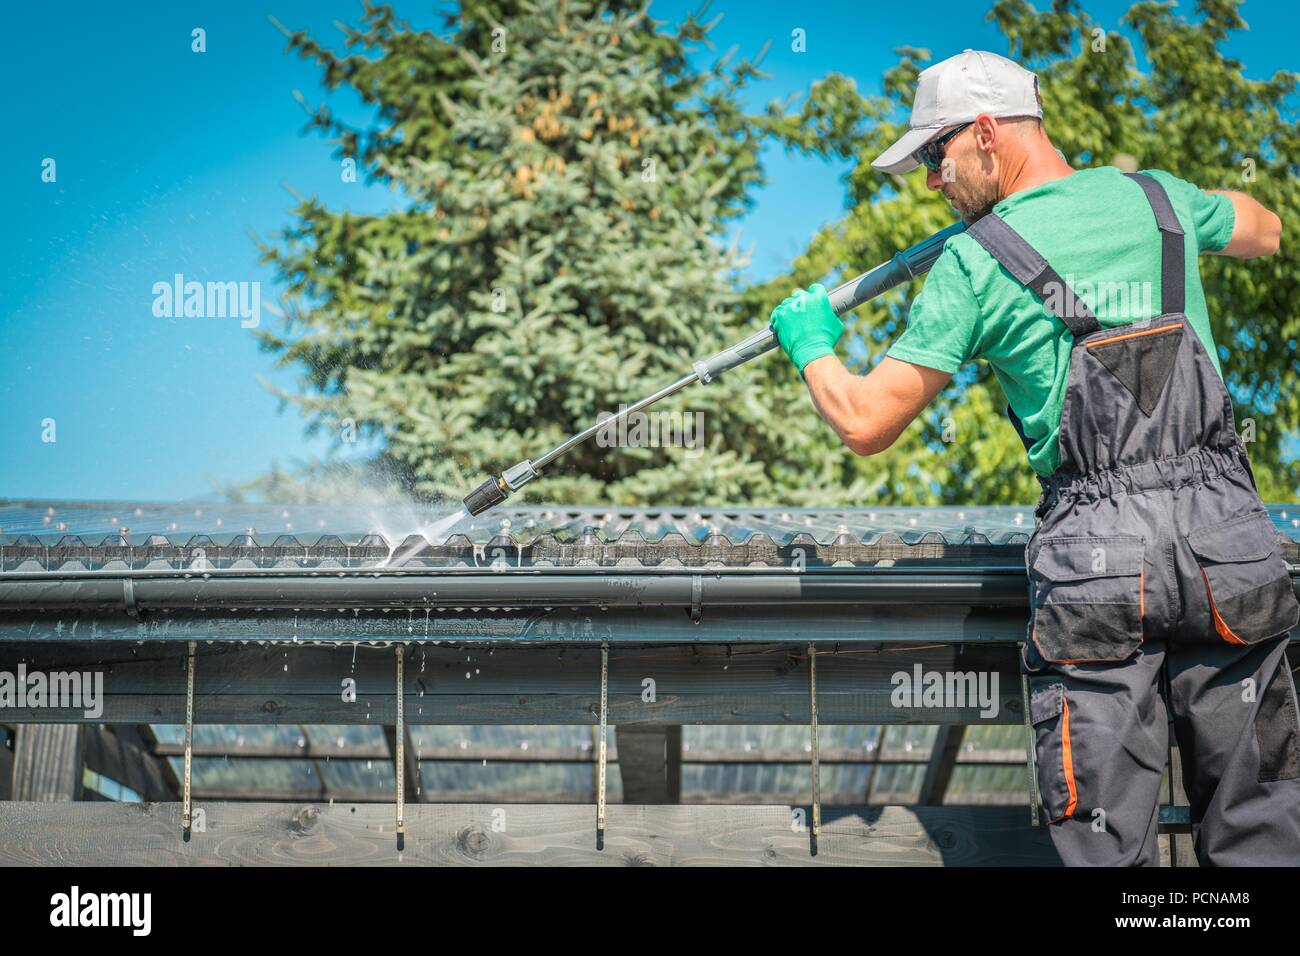 Roof and Gutters Power Cleaning Using Pressure Washer. Caucasian Worker. Stock Photo